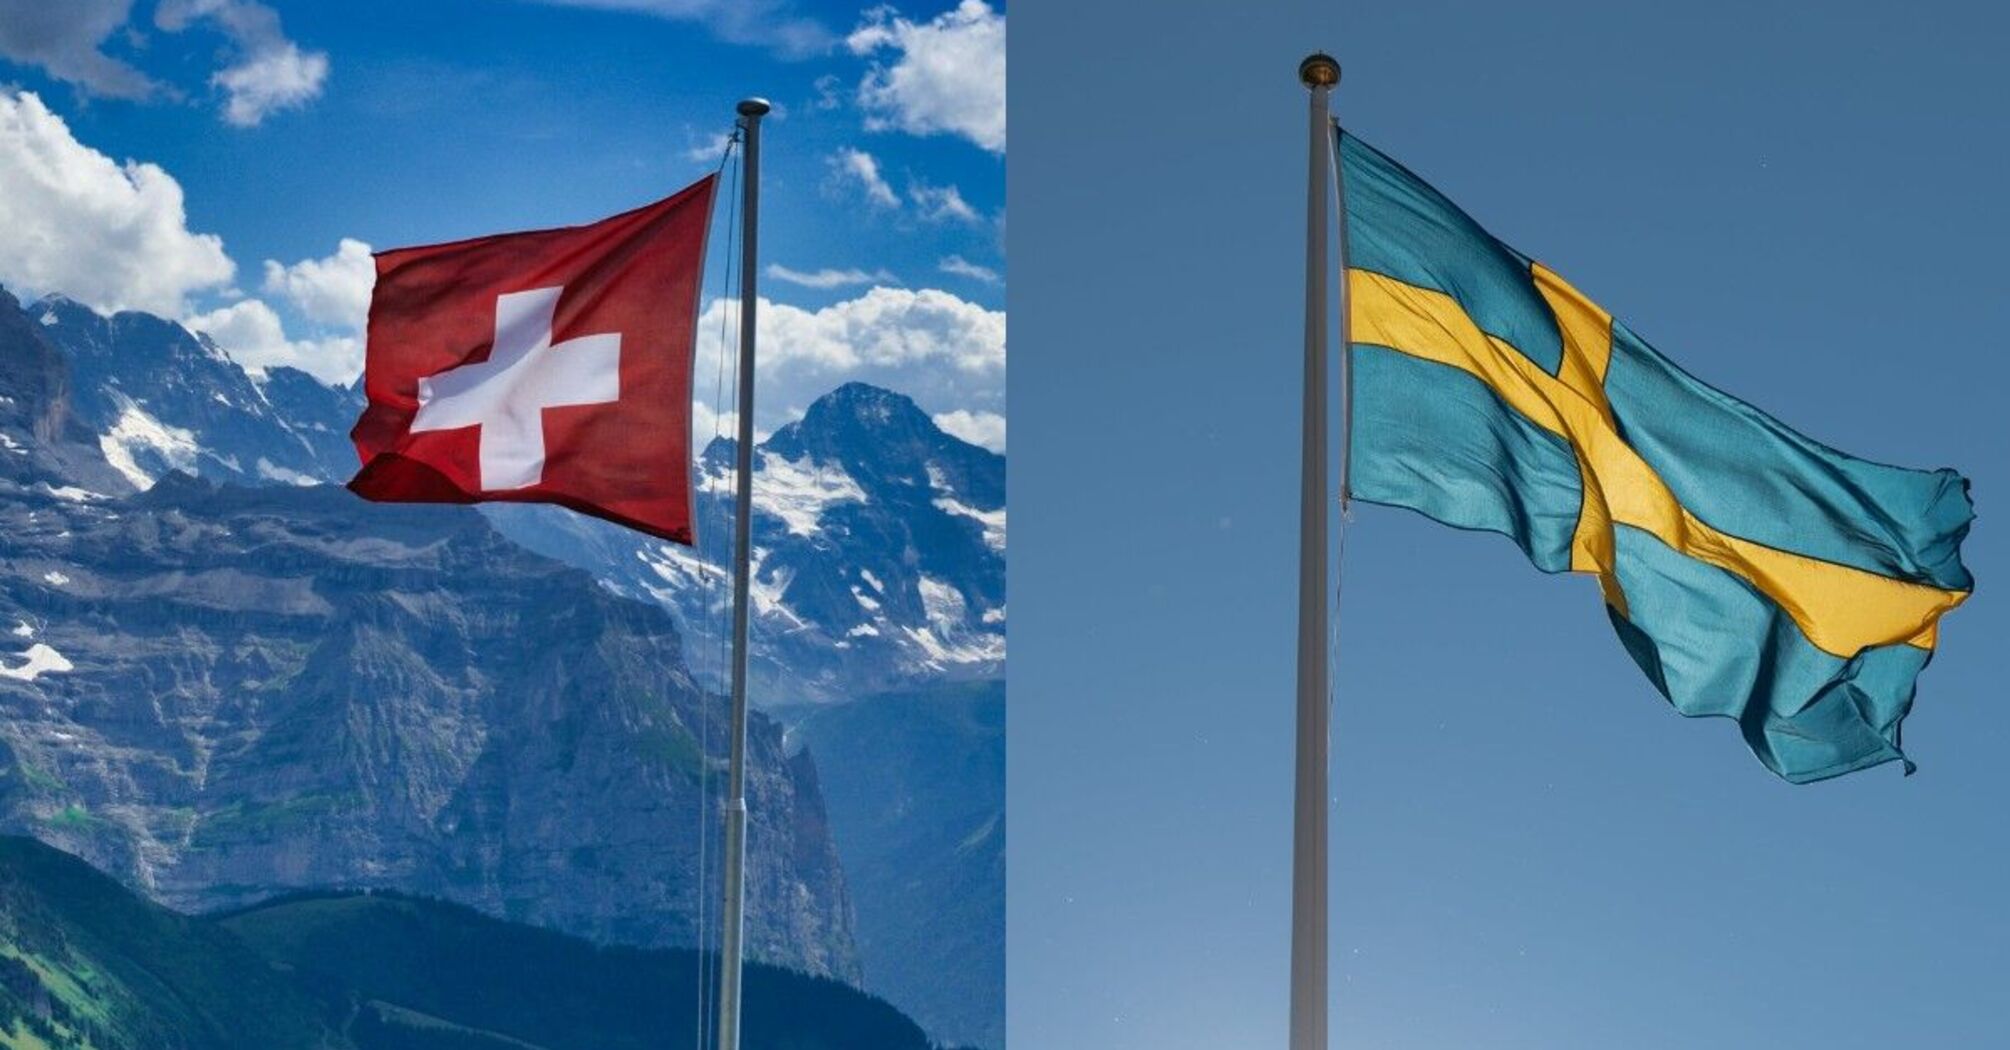 About 120,000 people a year confuse these countries: Sweden names fundamental differences with Switzerland